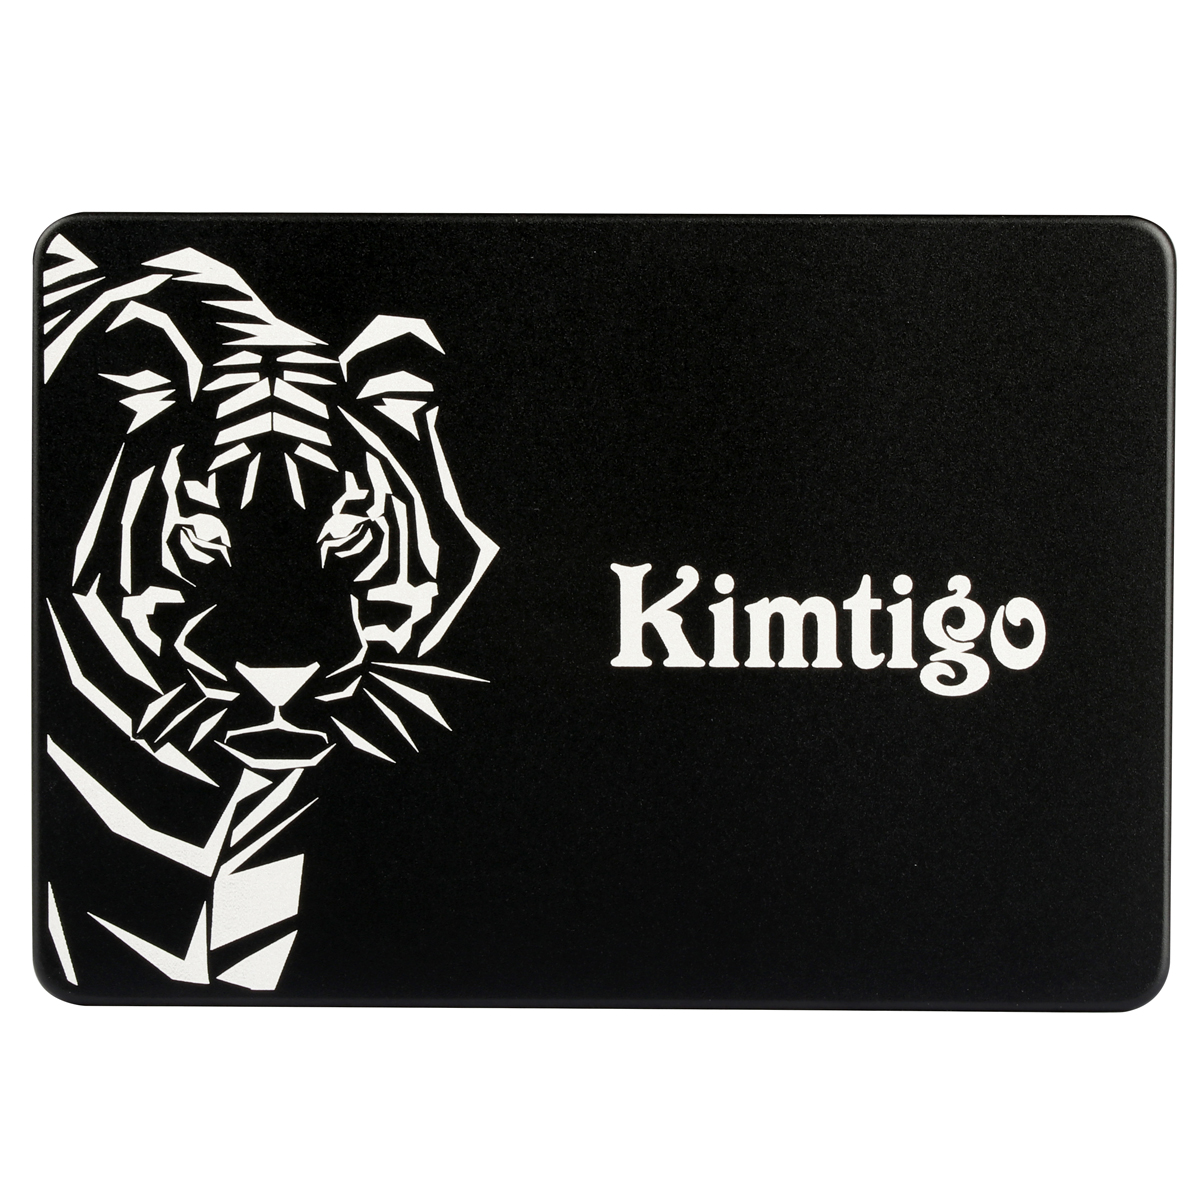 Kimtigo KTA-320 2.5 inch SATA 3 Solid State Drives 128GB 256GB 512GB 1T Hard Disk Up to Above 500MB/s Read Speed for Laptop Desktop